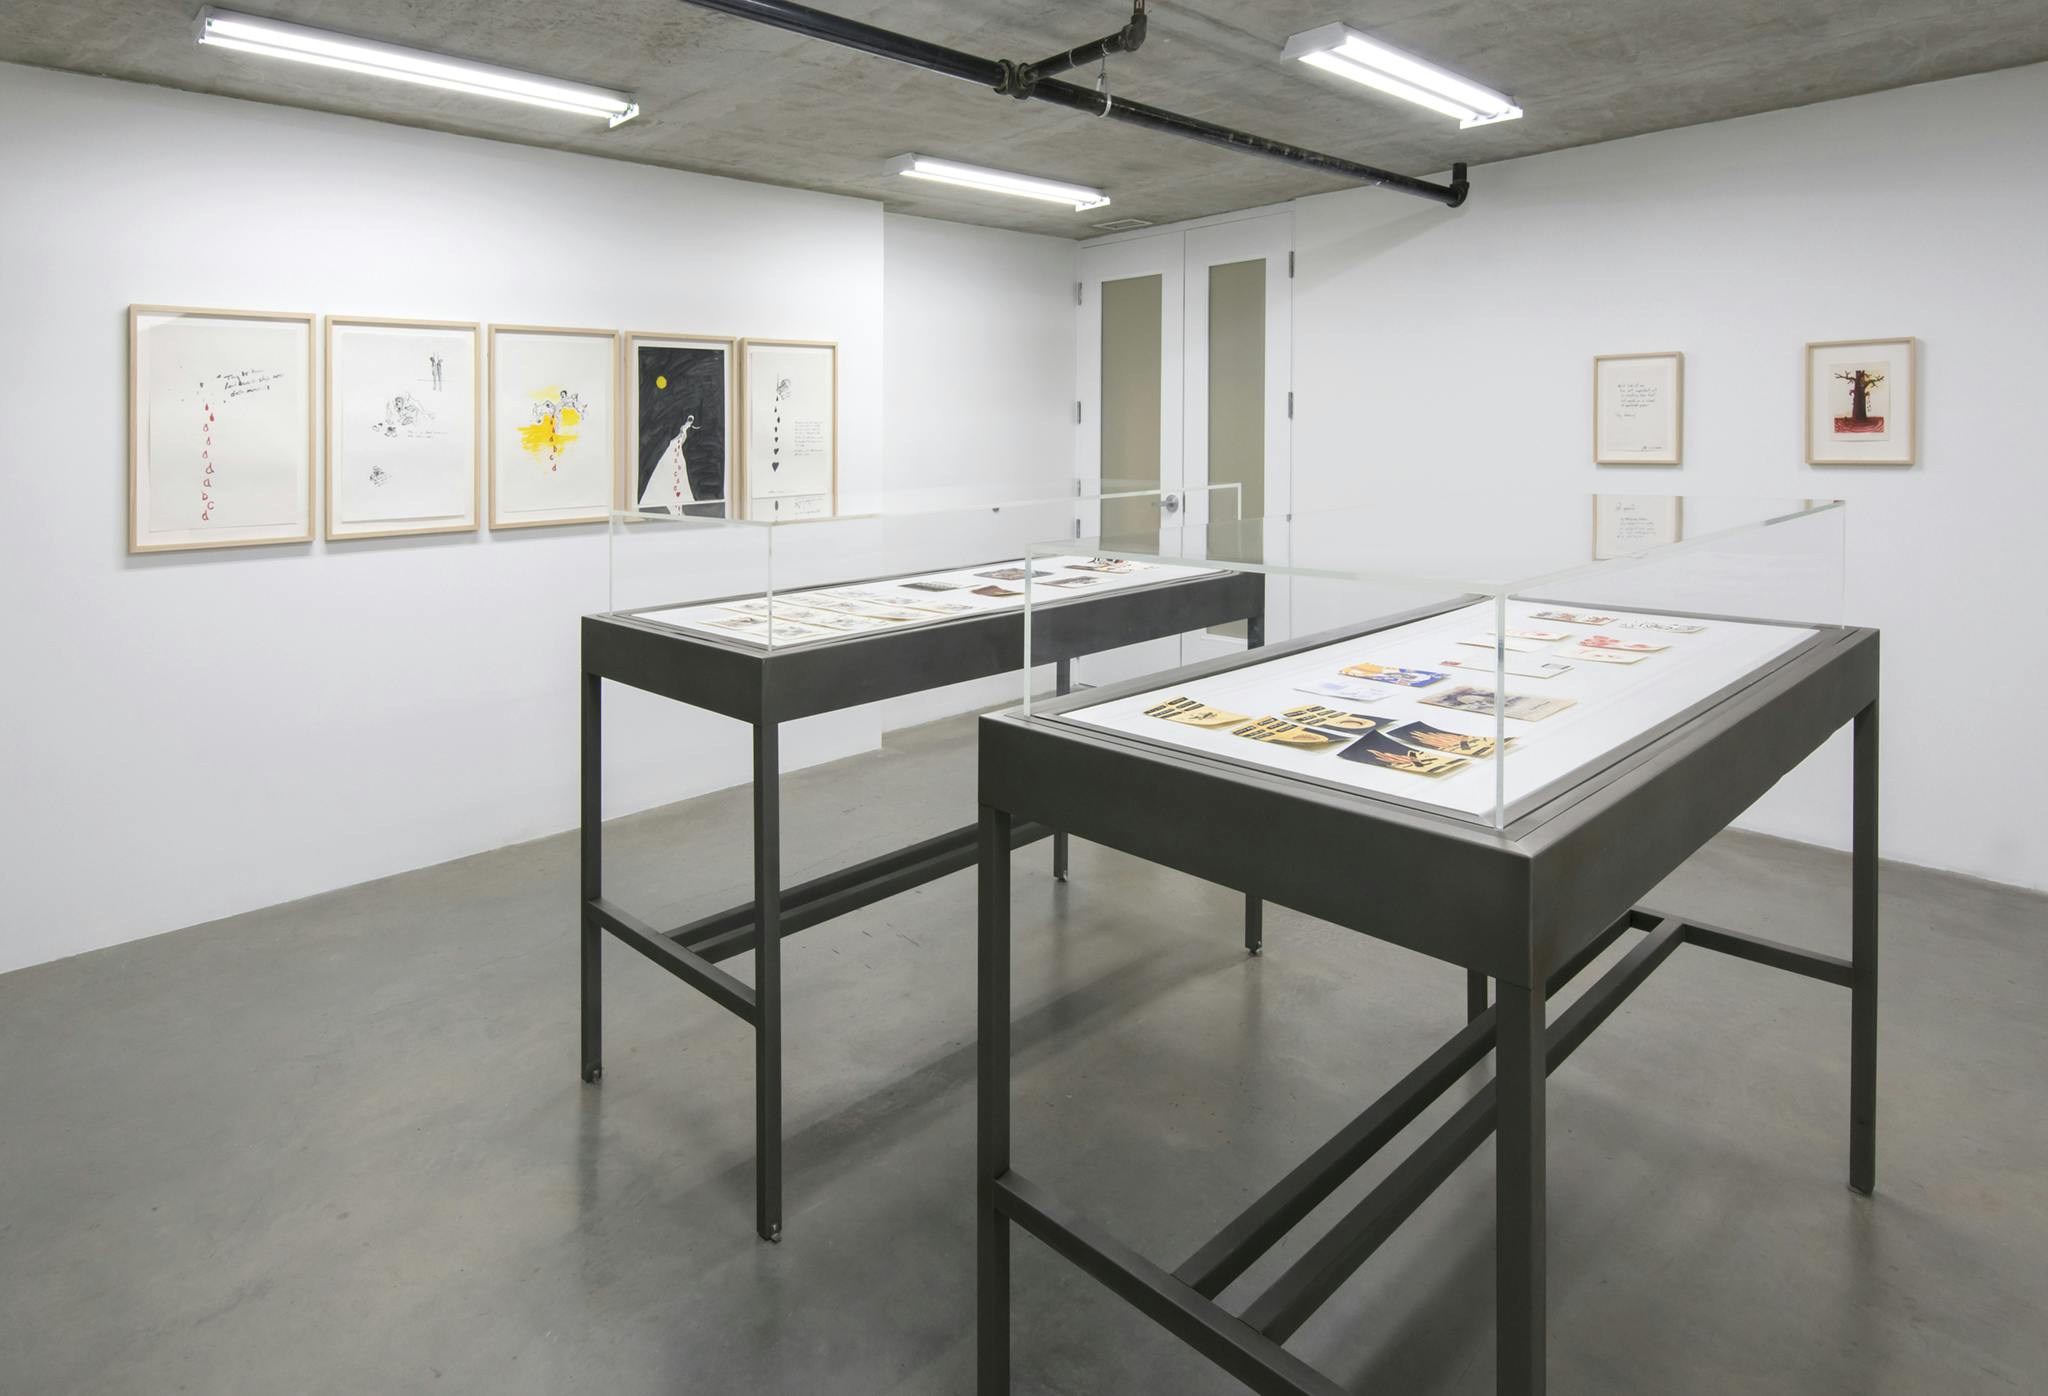 Installation image of eight framed works on paper hanging on a wall. Two vitrines sit at the center of the room within which various small works on paper are displayed. 